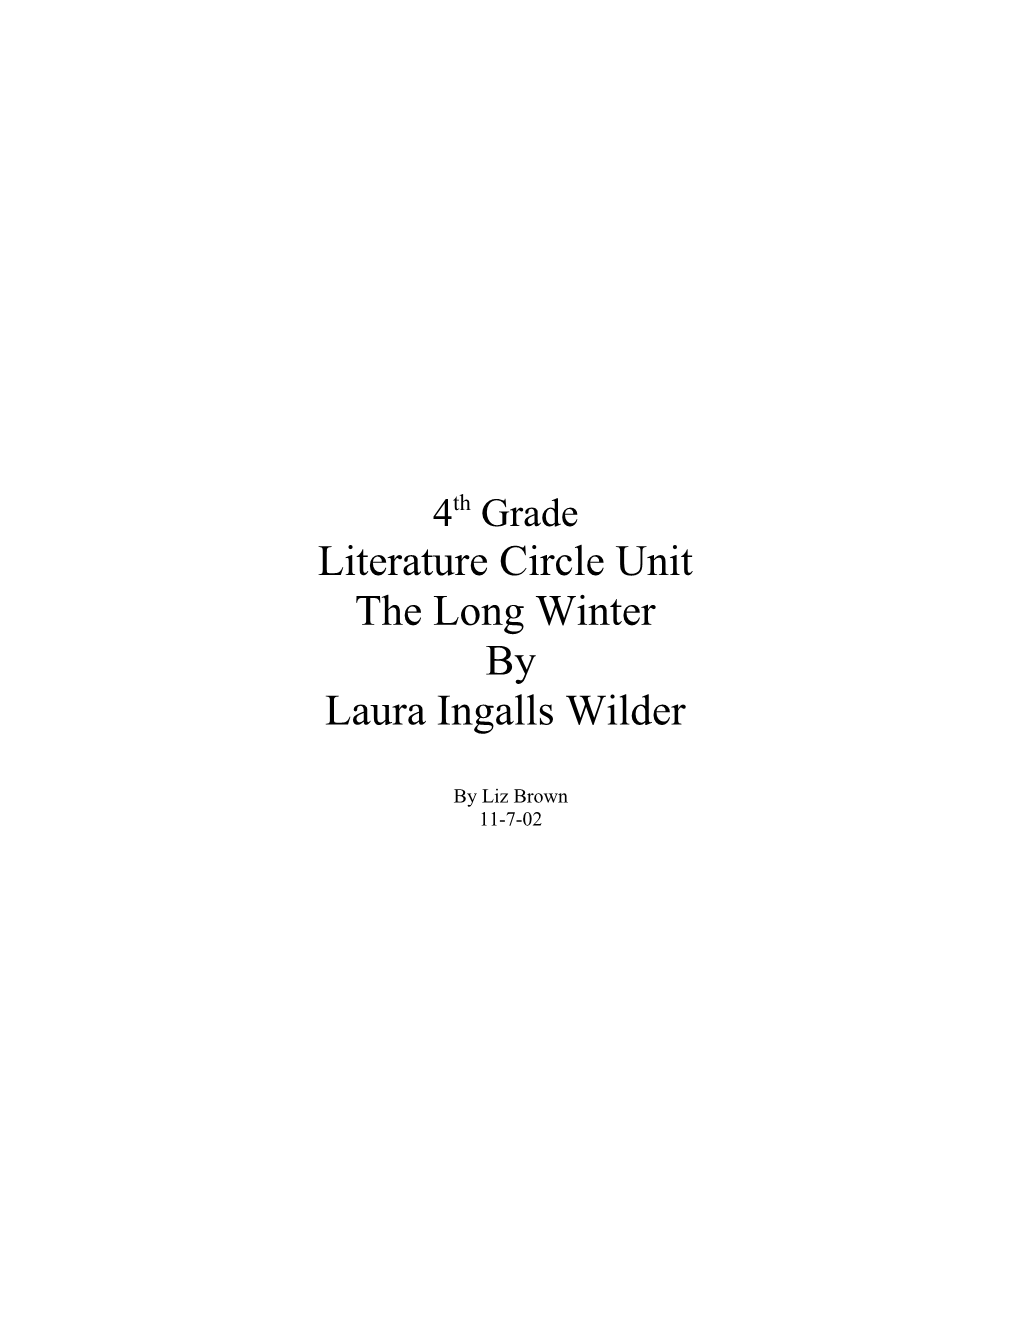 The Long Winter By Laura Ingalls Wilder